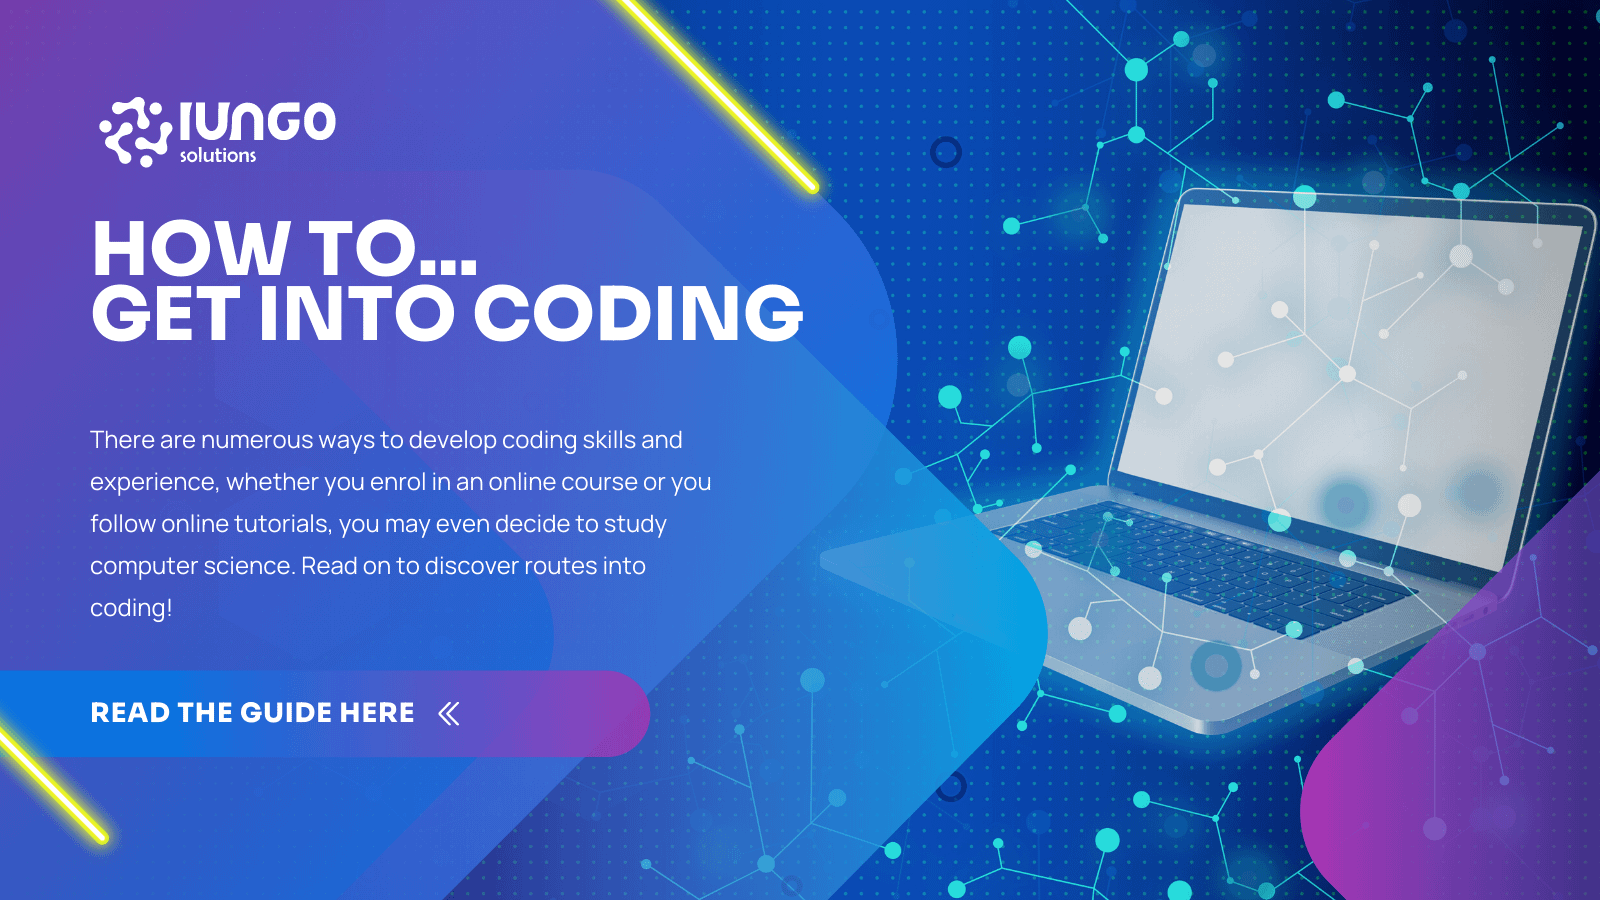 How to: Get into coding